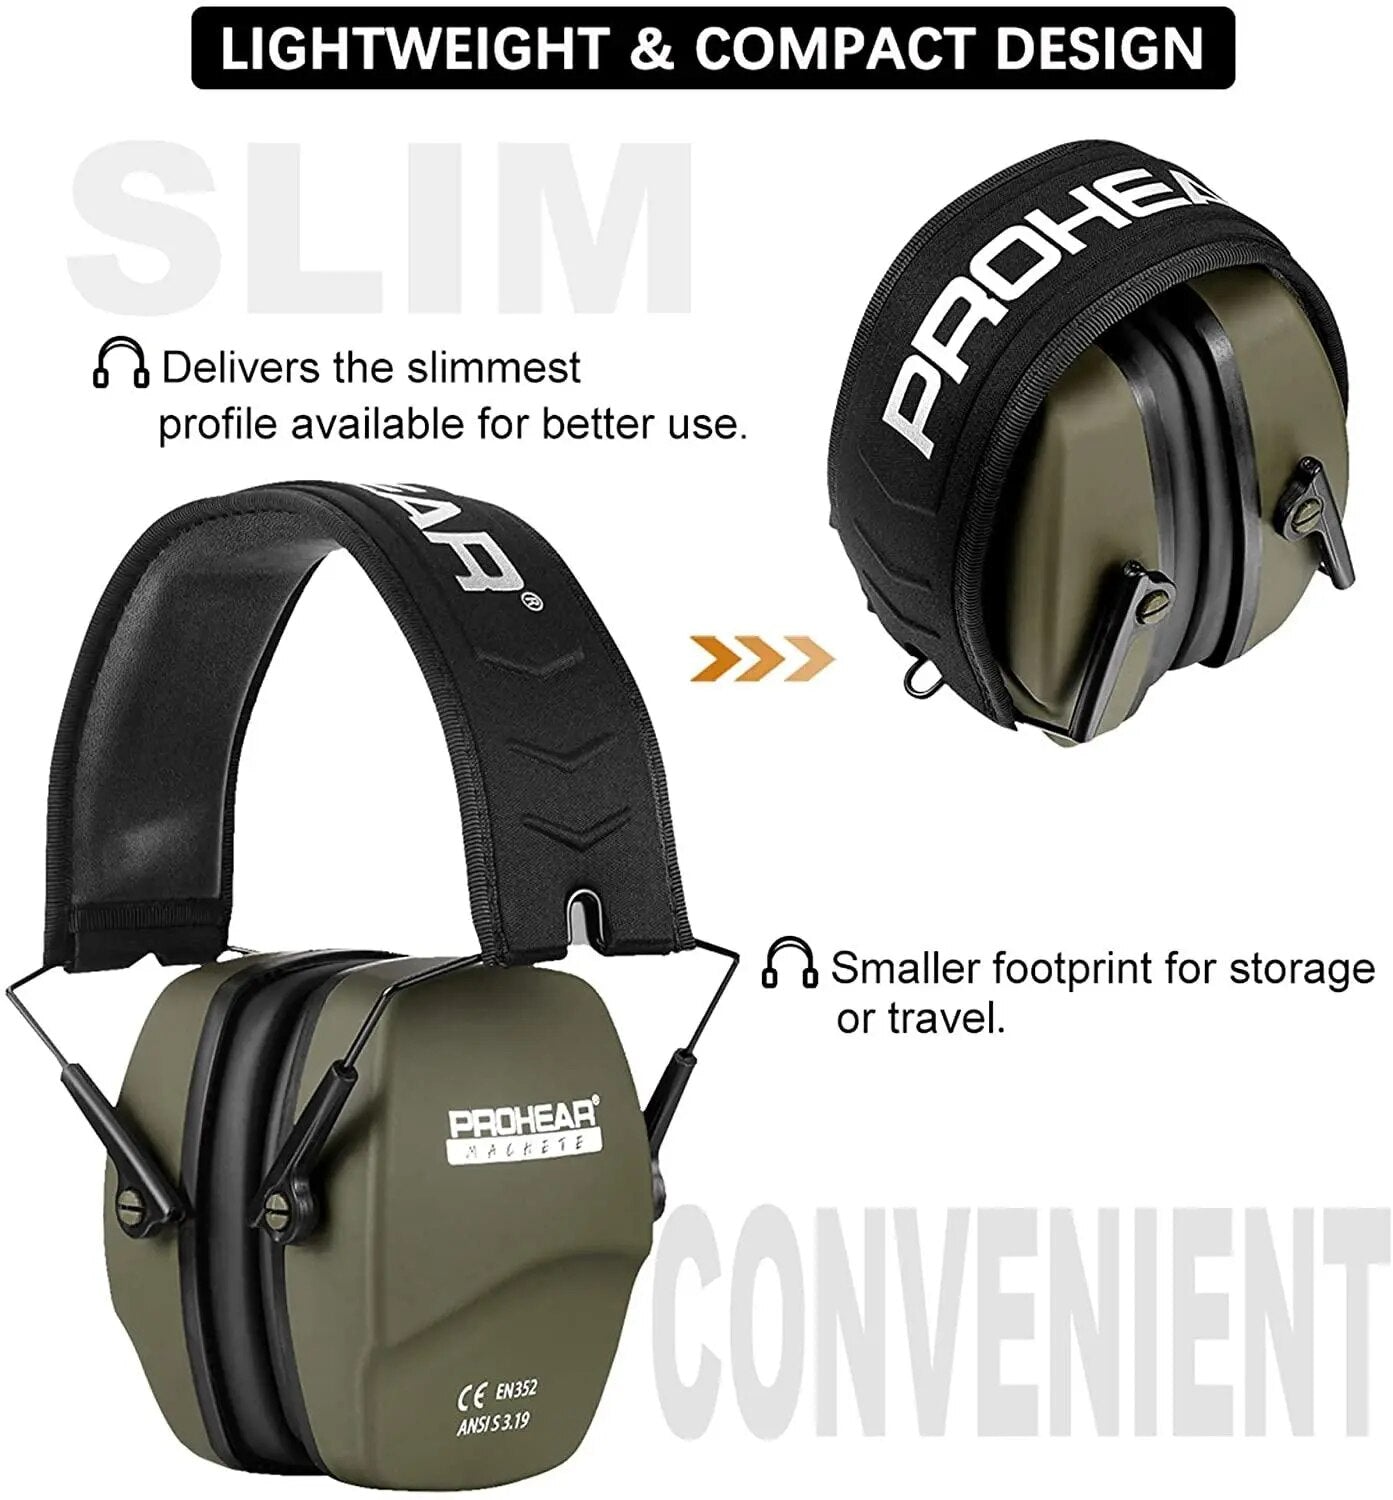 ZOHAN Ear Protection Safety Earmuffs Noise Reduction Slim